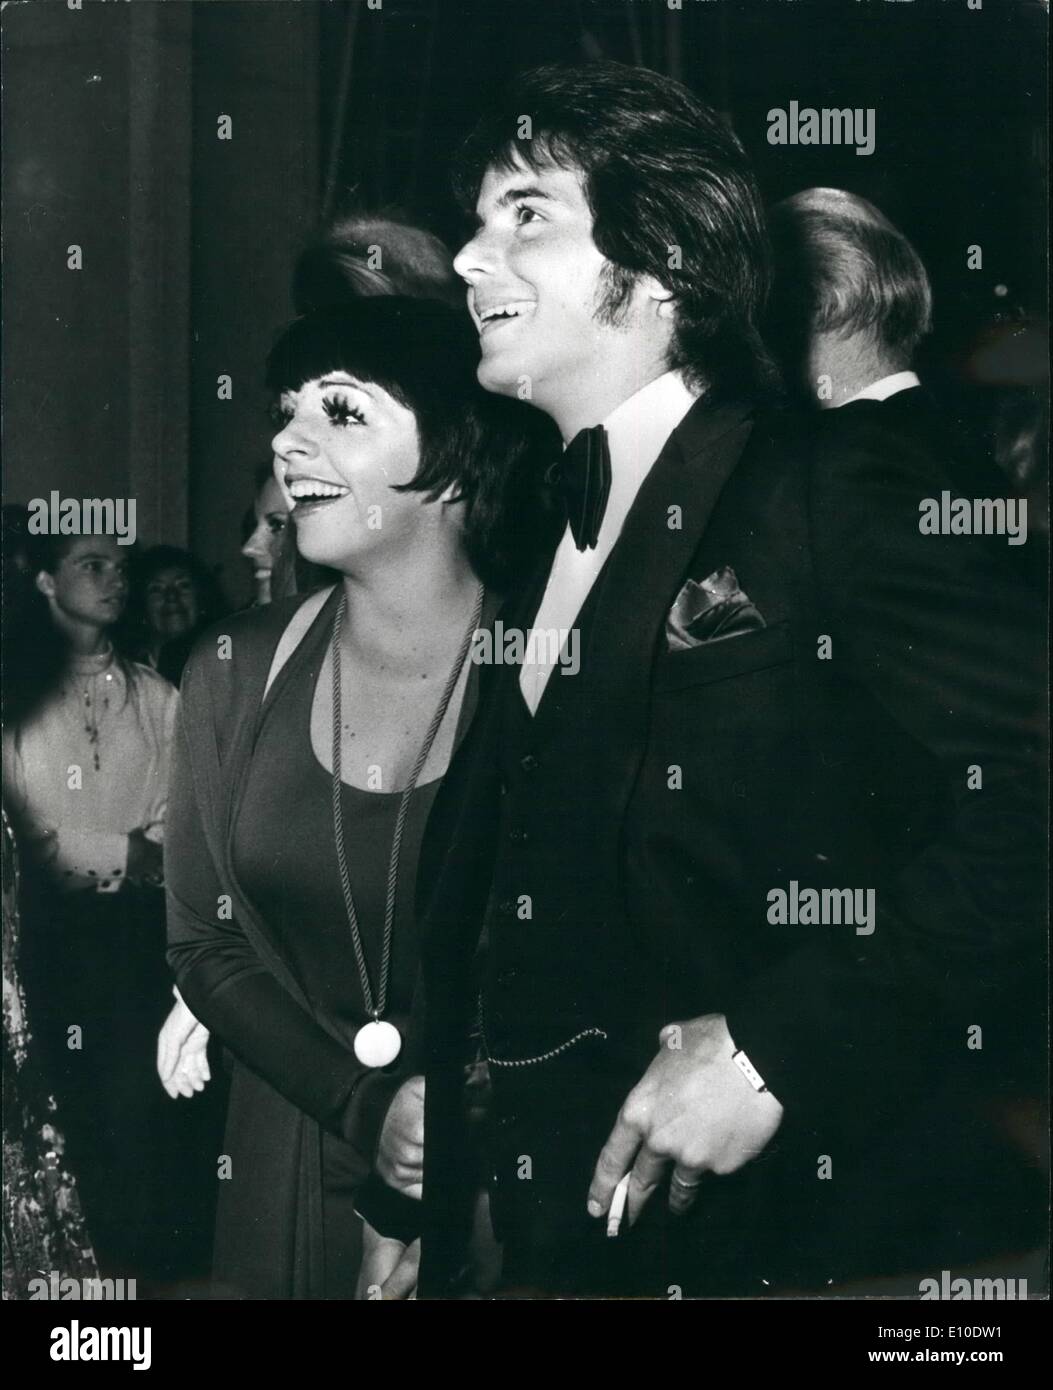 May 05, 1972 - Liza Minnelli To Mary Desi Arnaz Jr Actor Desi Arnaz Jr., said in a Tokyo that he will be marring Liza Minnelli, Stock Photo